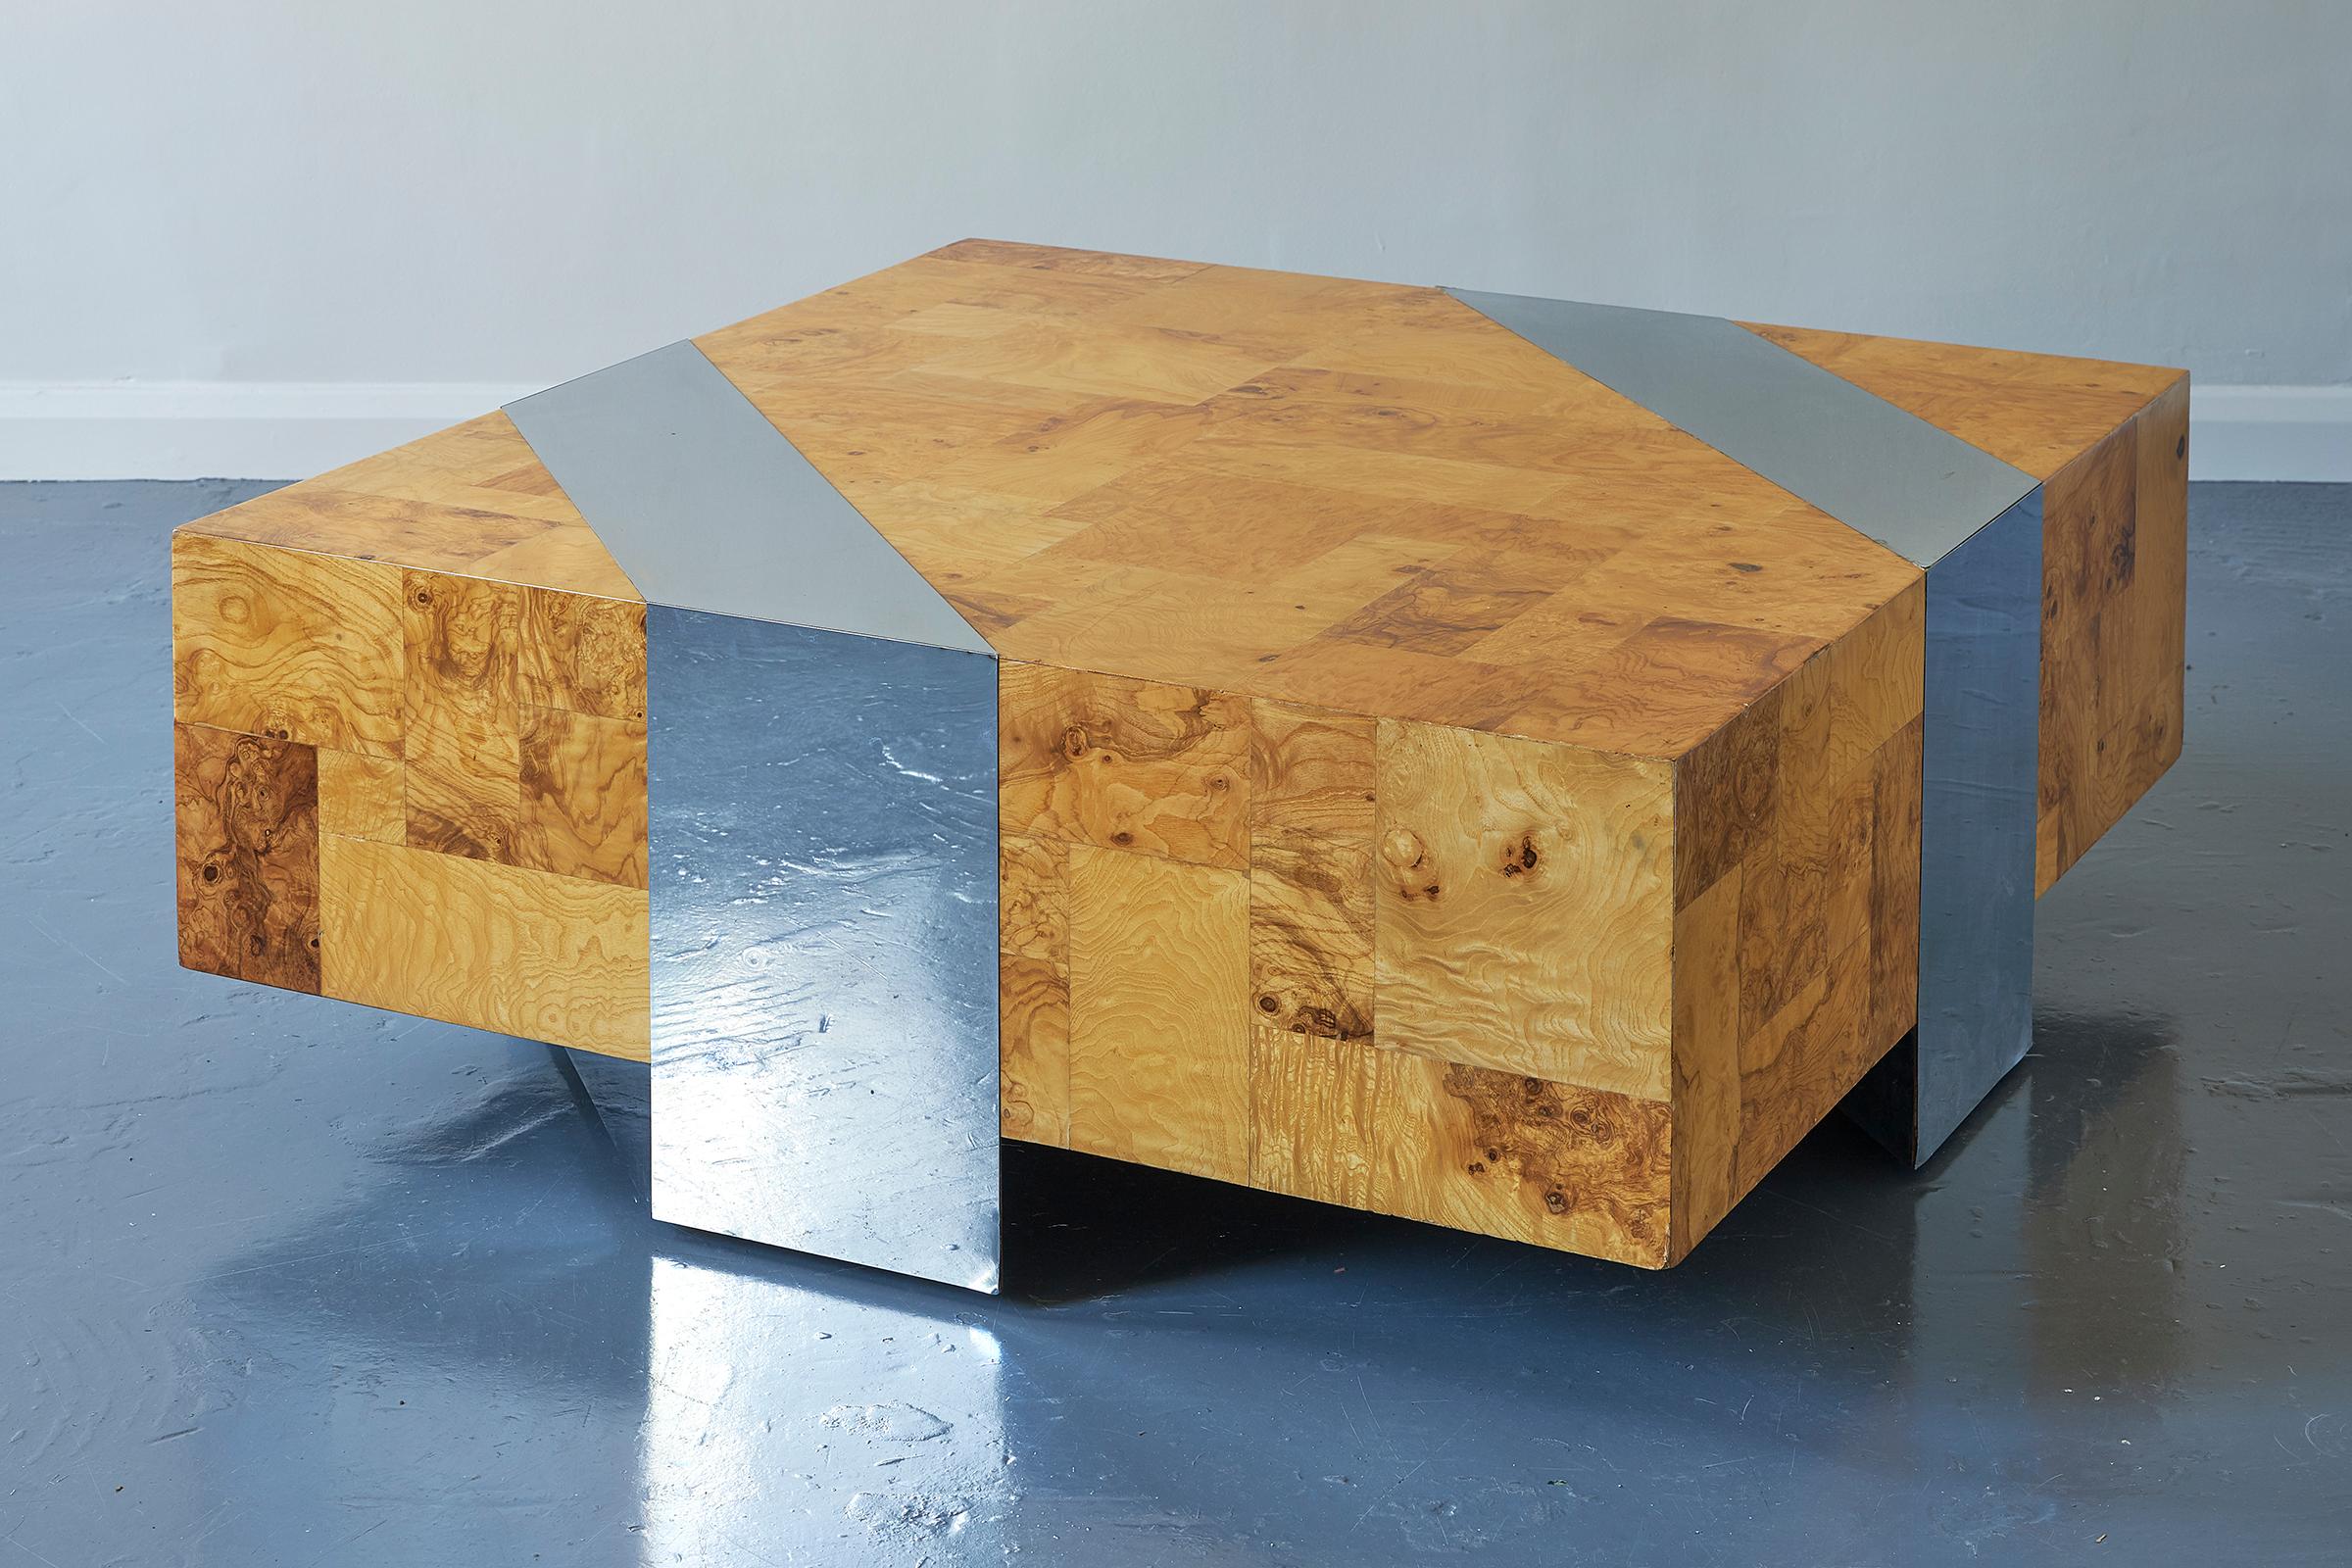 A late 20th century Brutalist coffee table by Paul Evans (American, 1931-1987) for Directional Furniture, of his signature patchwork style employed in the 1970s, of square shape, patched burl olive wood with trapezoid inserts of chromed steel.